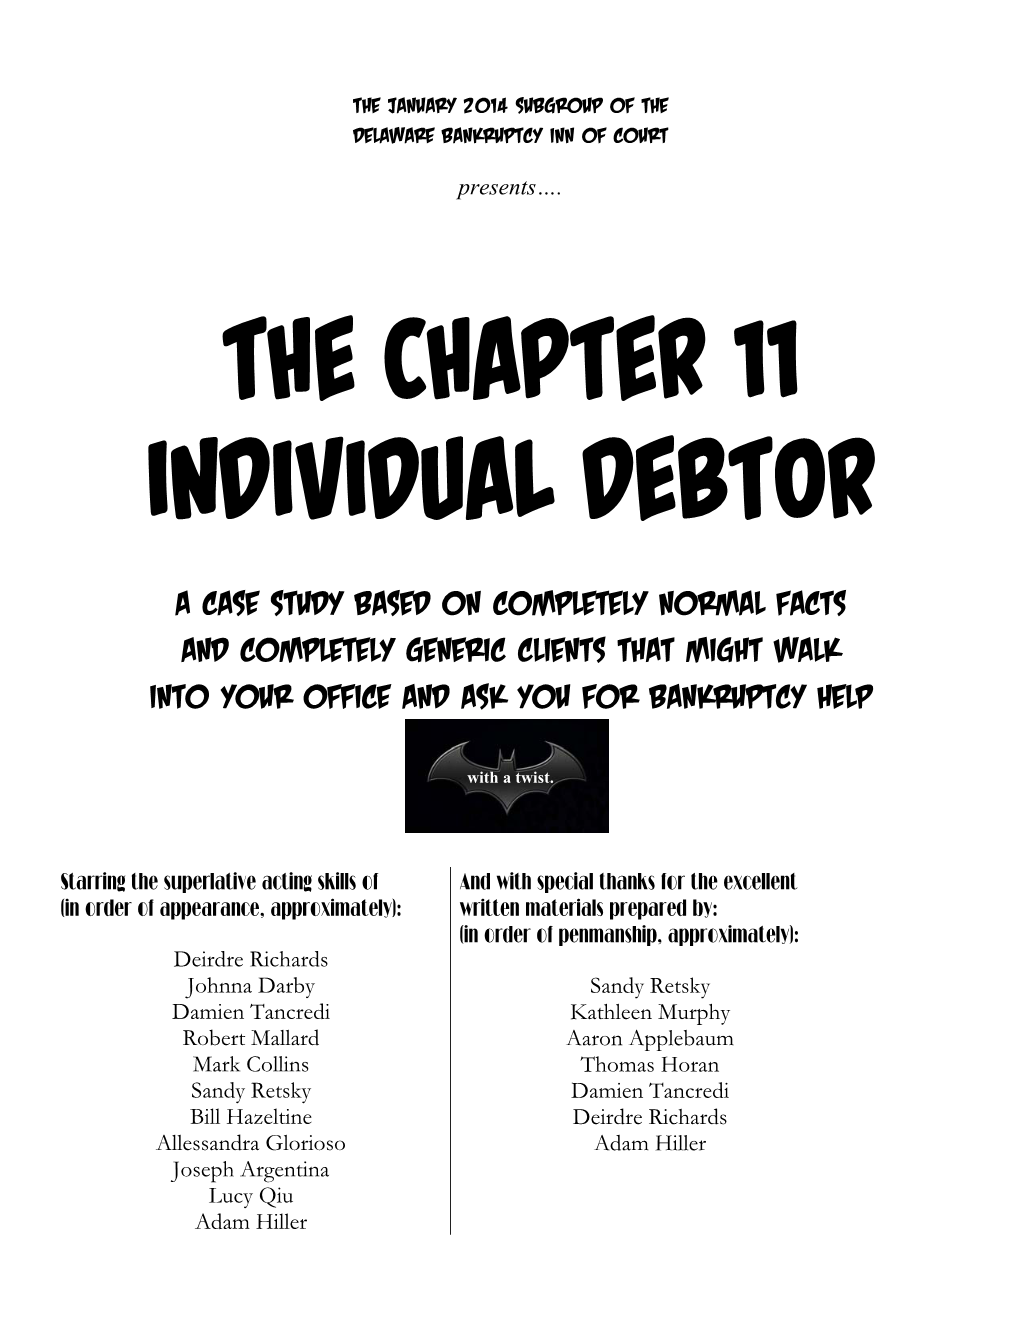 The Chapter 11 Individual Debtor